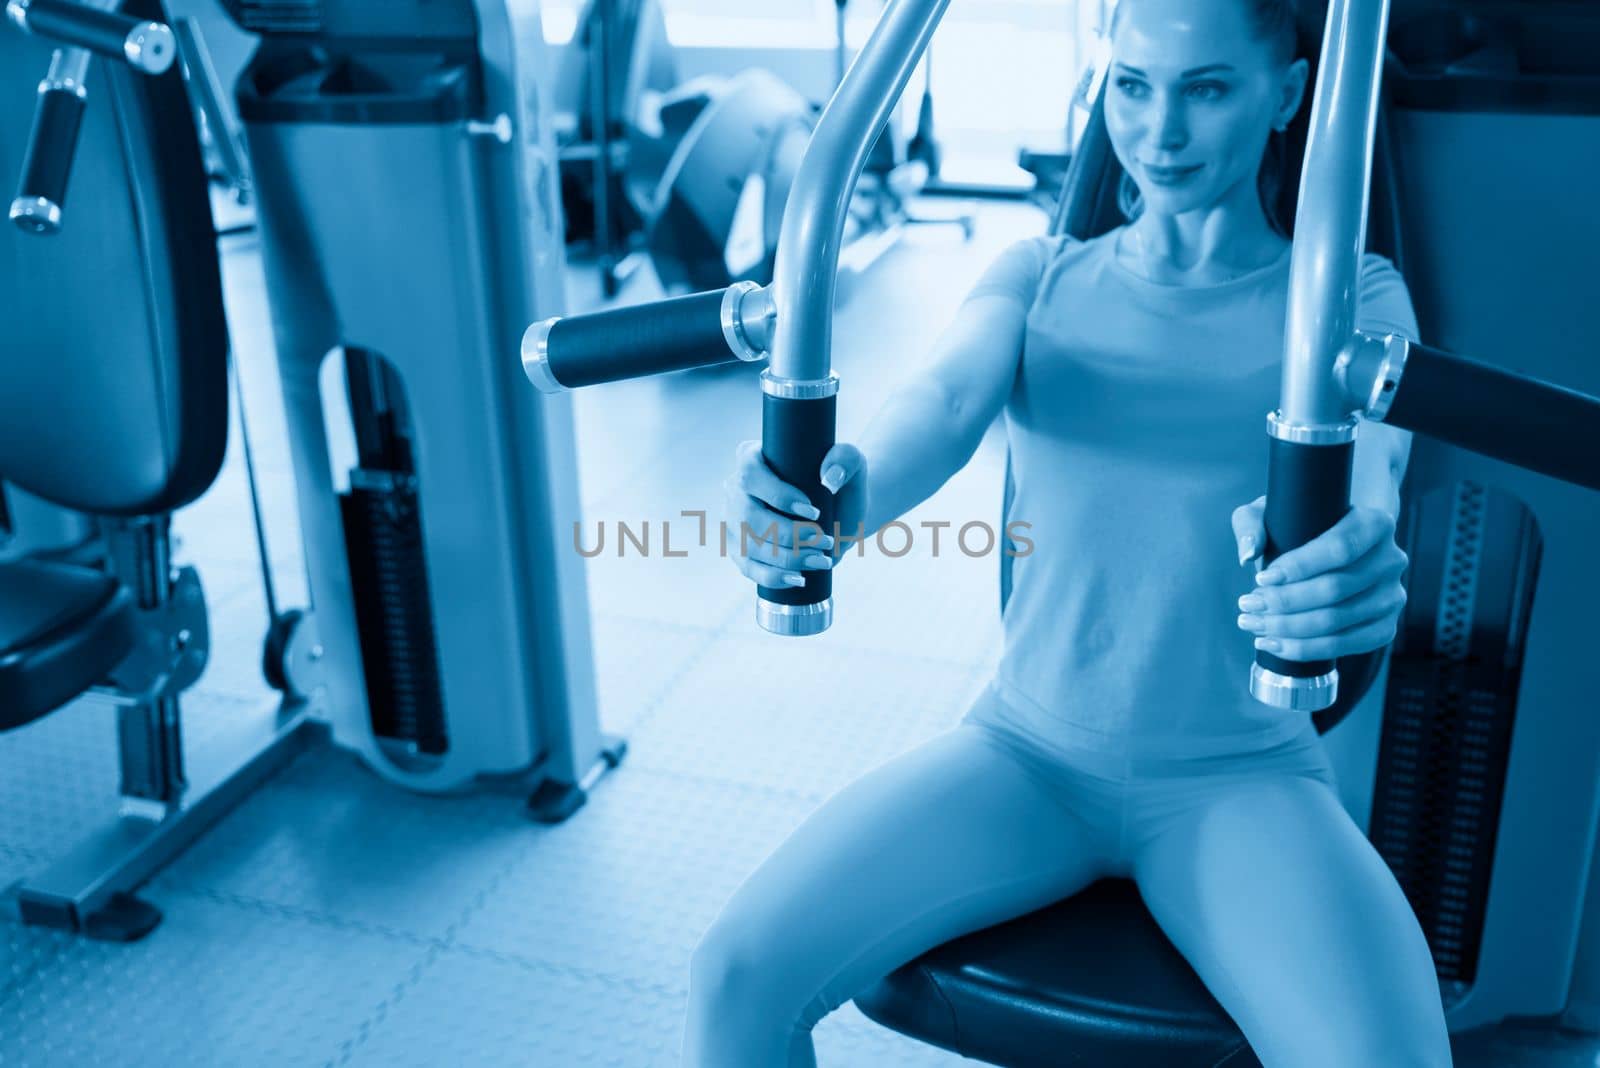 Torso portrait of Cheerful young adult caucasian woman working out on exercise machine inside gym by Mariakray